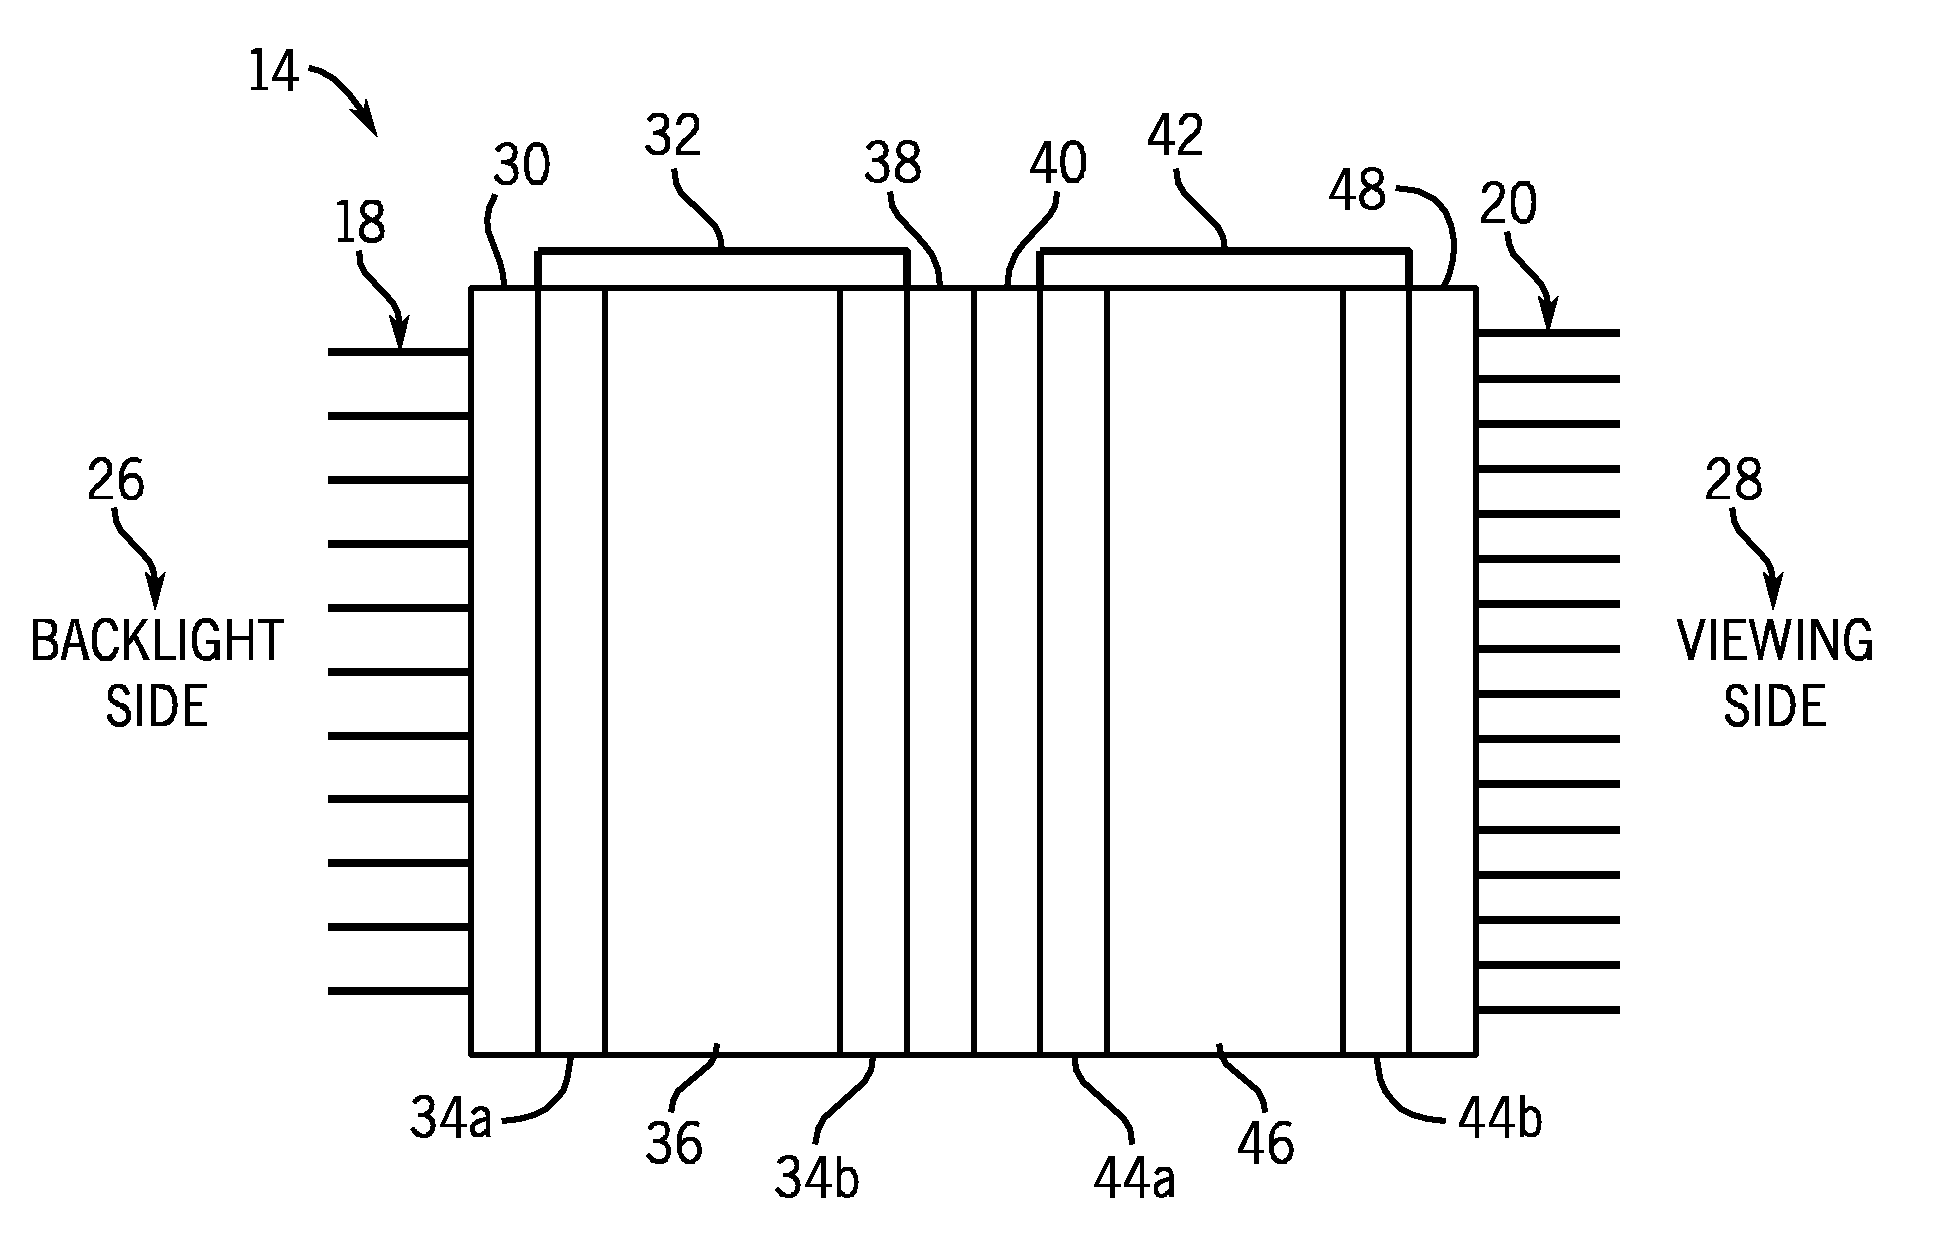 System and Method for Creating a Mirror Effect in a Liquid Crystal Display